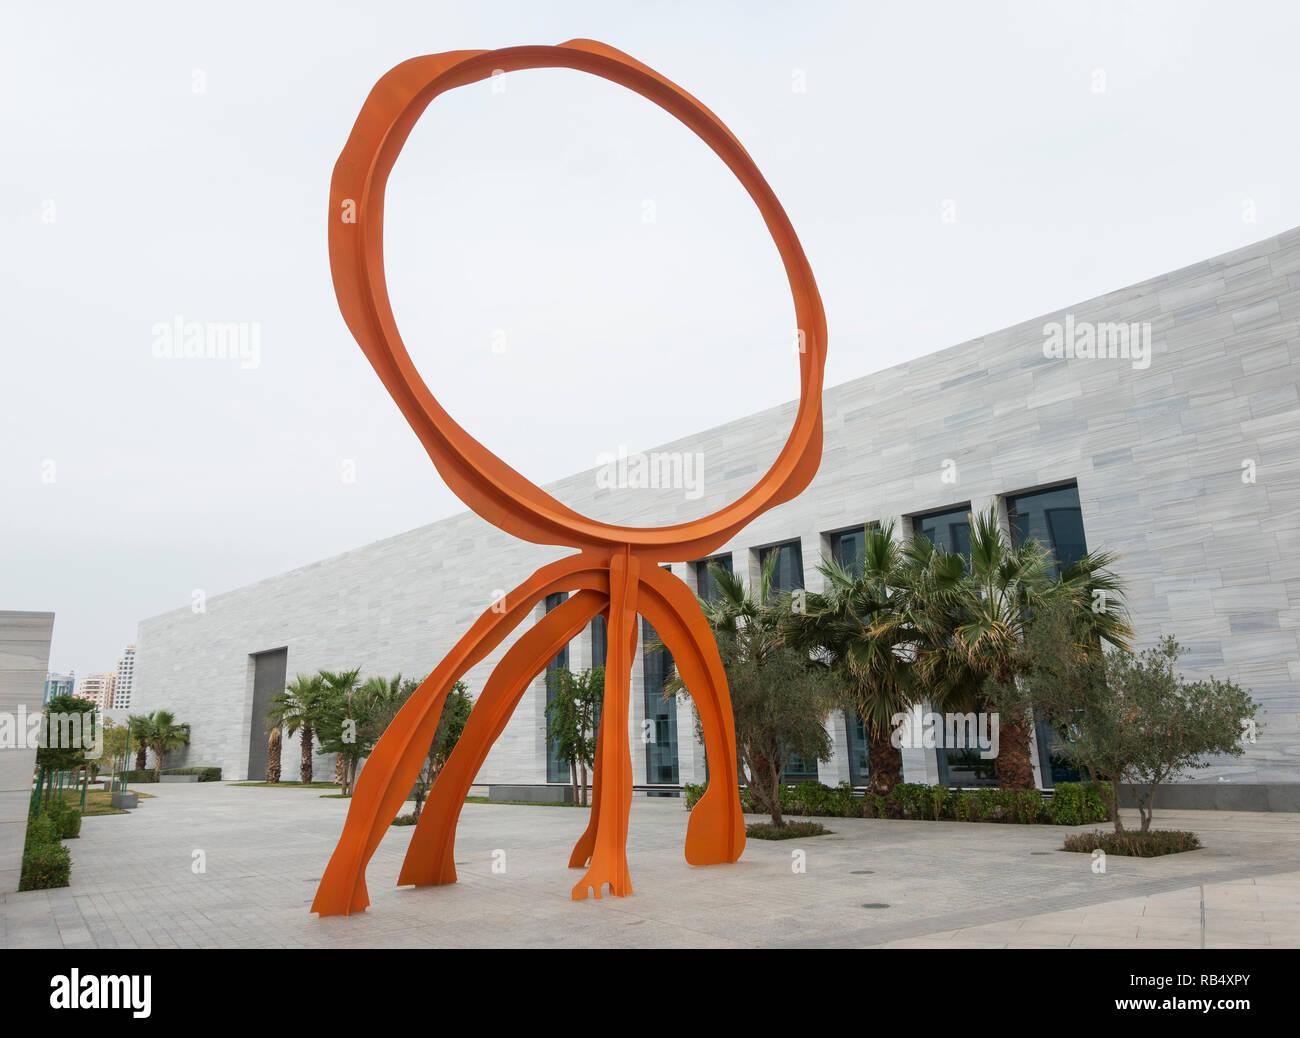 Sculpture in grounds of the new Sheikh Abdullah al Salem Cultural Centre in Kuwait City, Kuwait Stock Photo